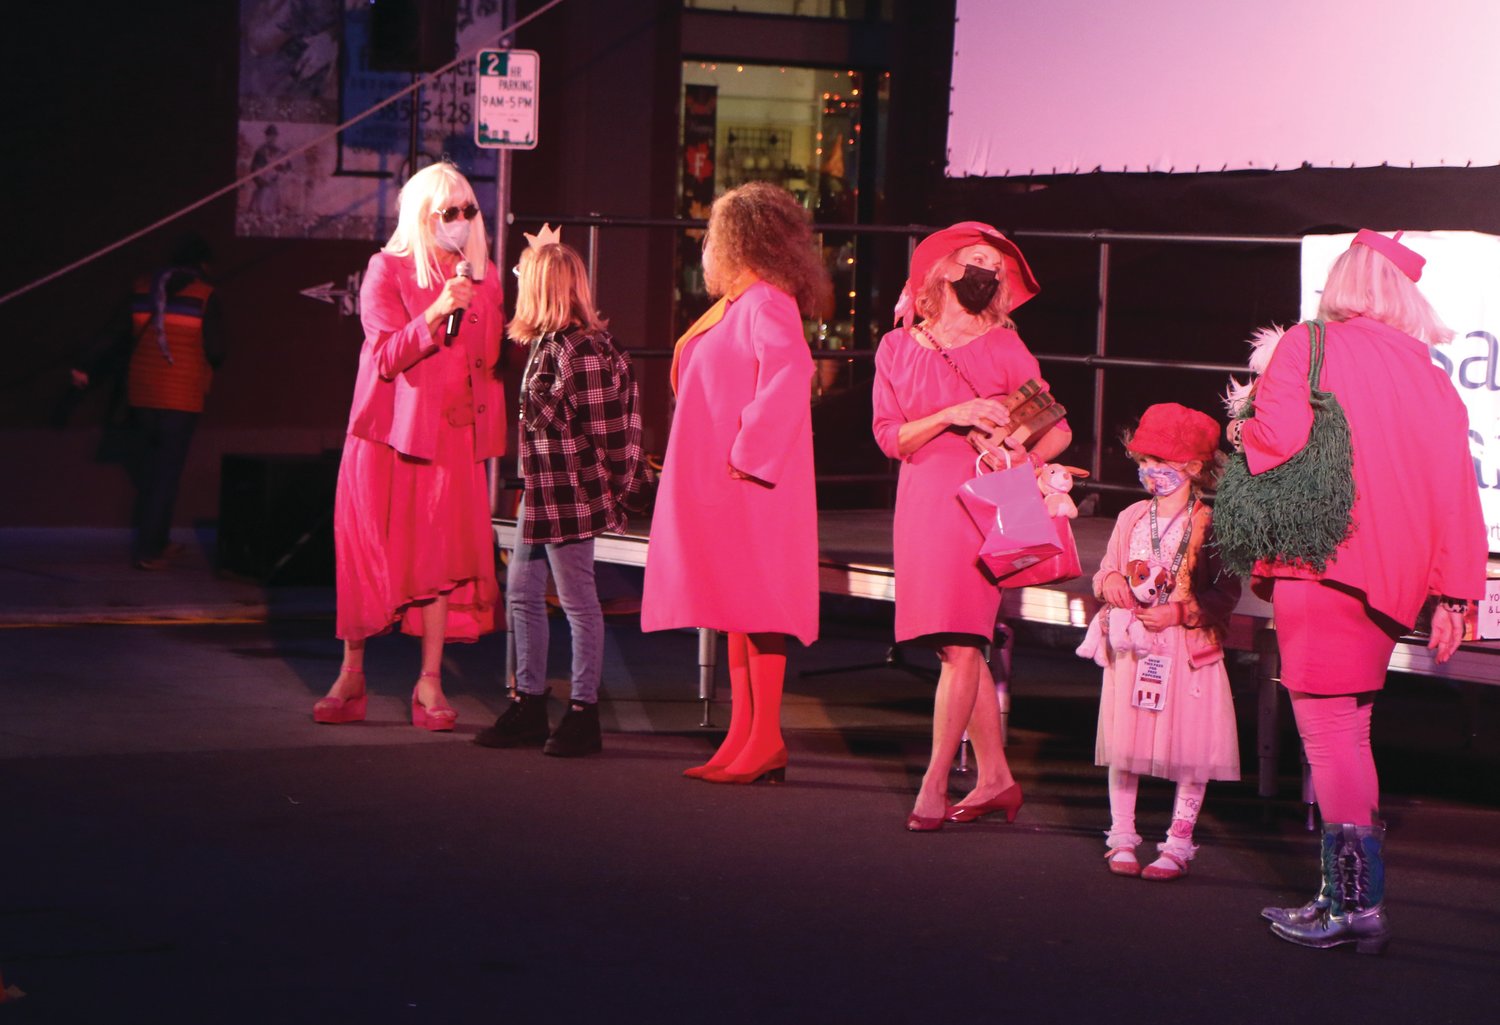 Contestants for the “Look like Elle and Bruiser” contest lined up on Saturday evening in the hottest of pink hues. Kirsten “Kiwi” Smith, the screenwriter of “Legally Blonde,” pictured third from the left, was on site to judge the contest. Smith celebrated the 20th anniversary of the film with the audience afterward at the 2021 Port Townsend Film Fest’s second outdoor feature night.